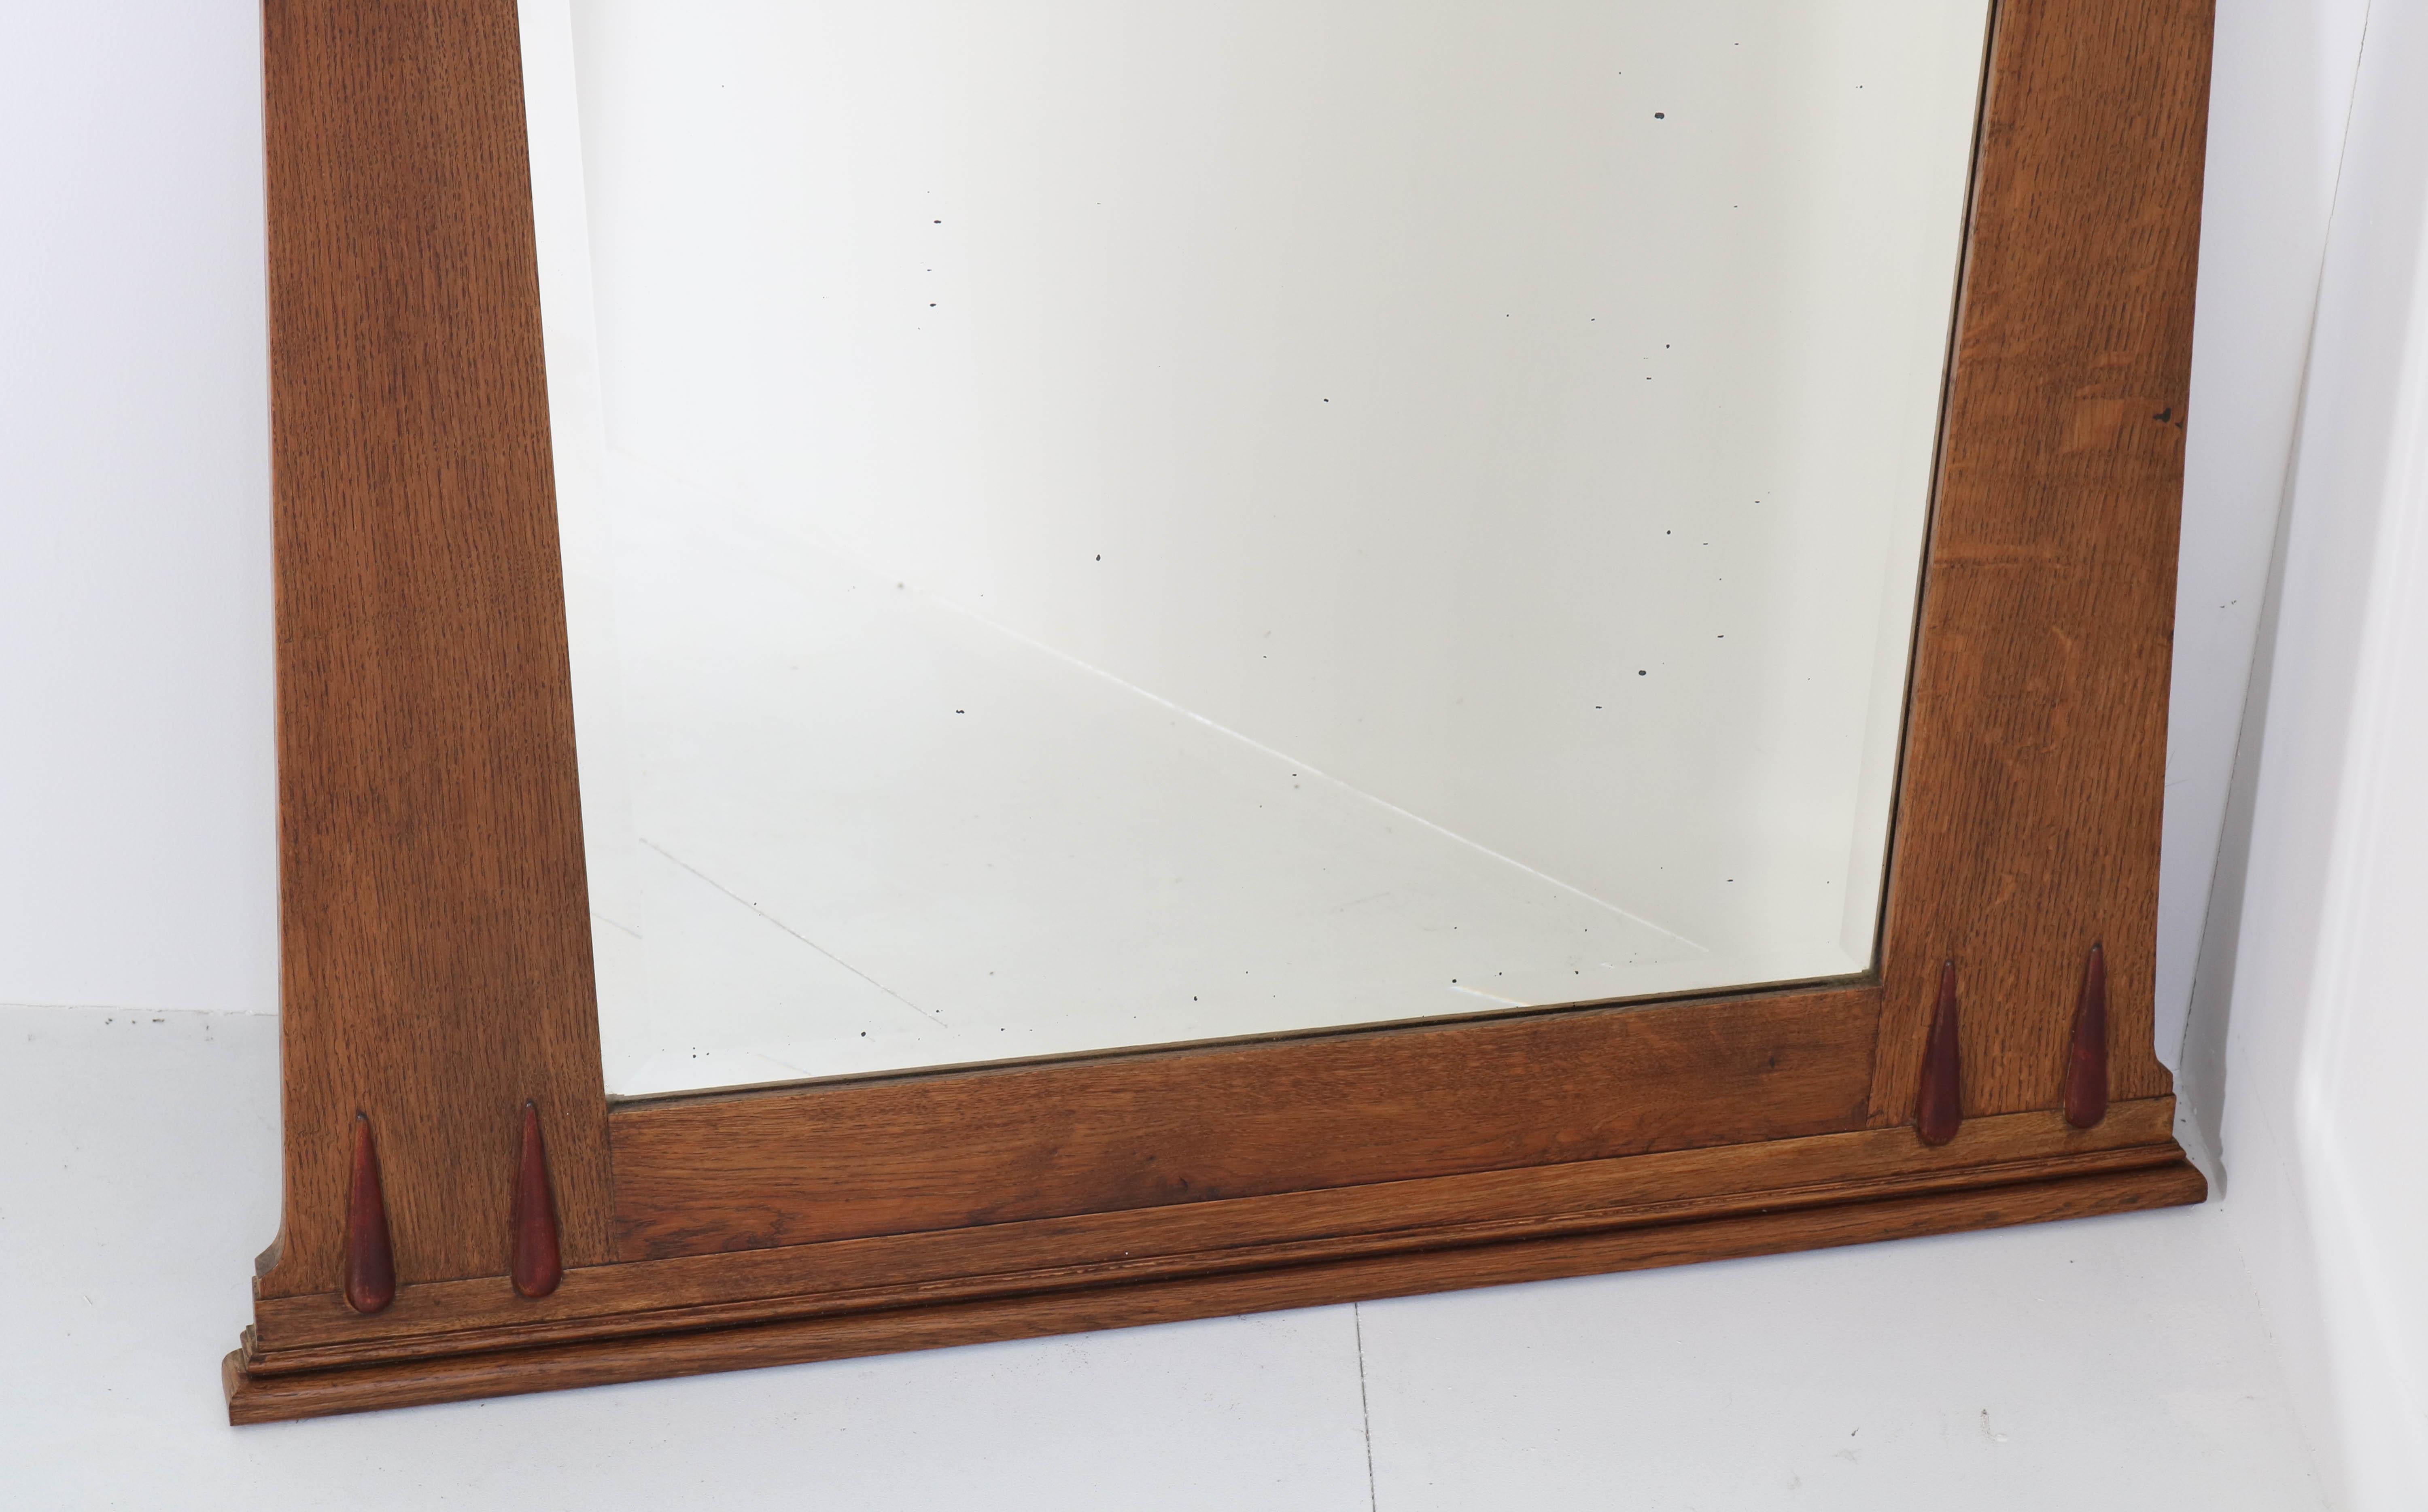 Early 20th Century Oak Art Deco Amsterdam School Wall Mirror with Beveled Glass, 1920s